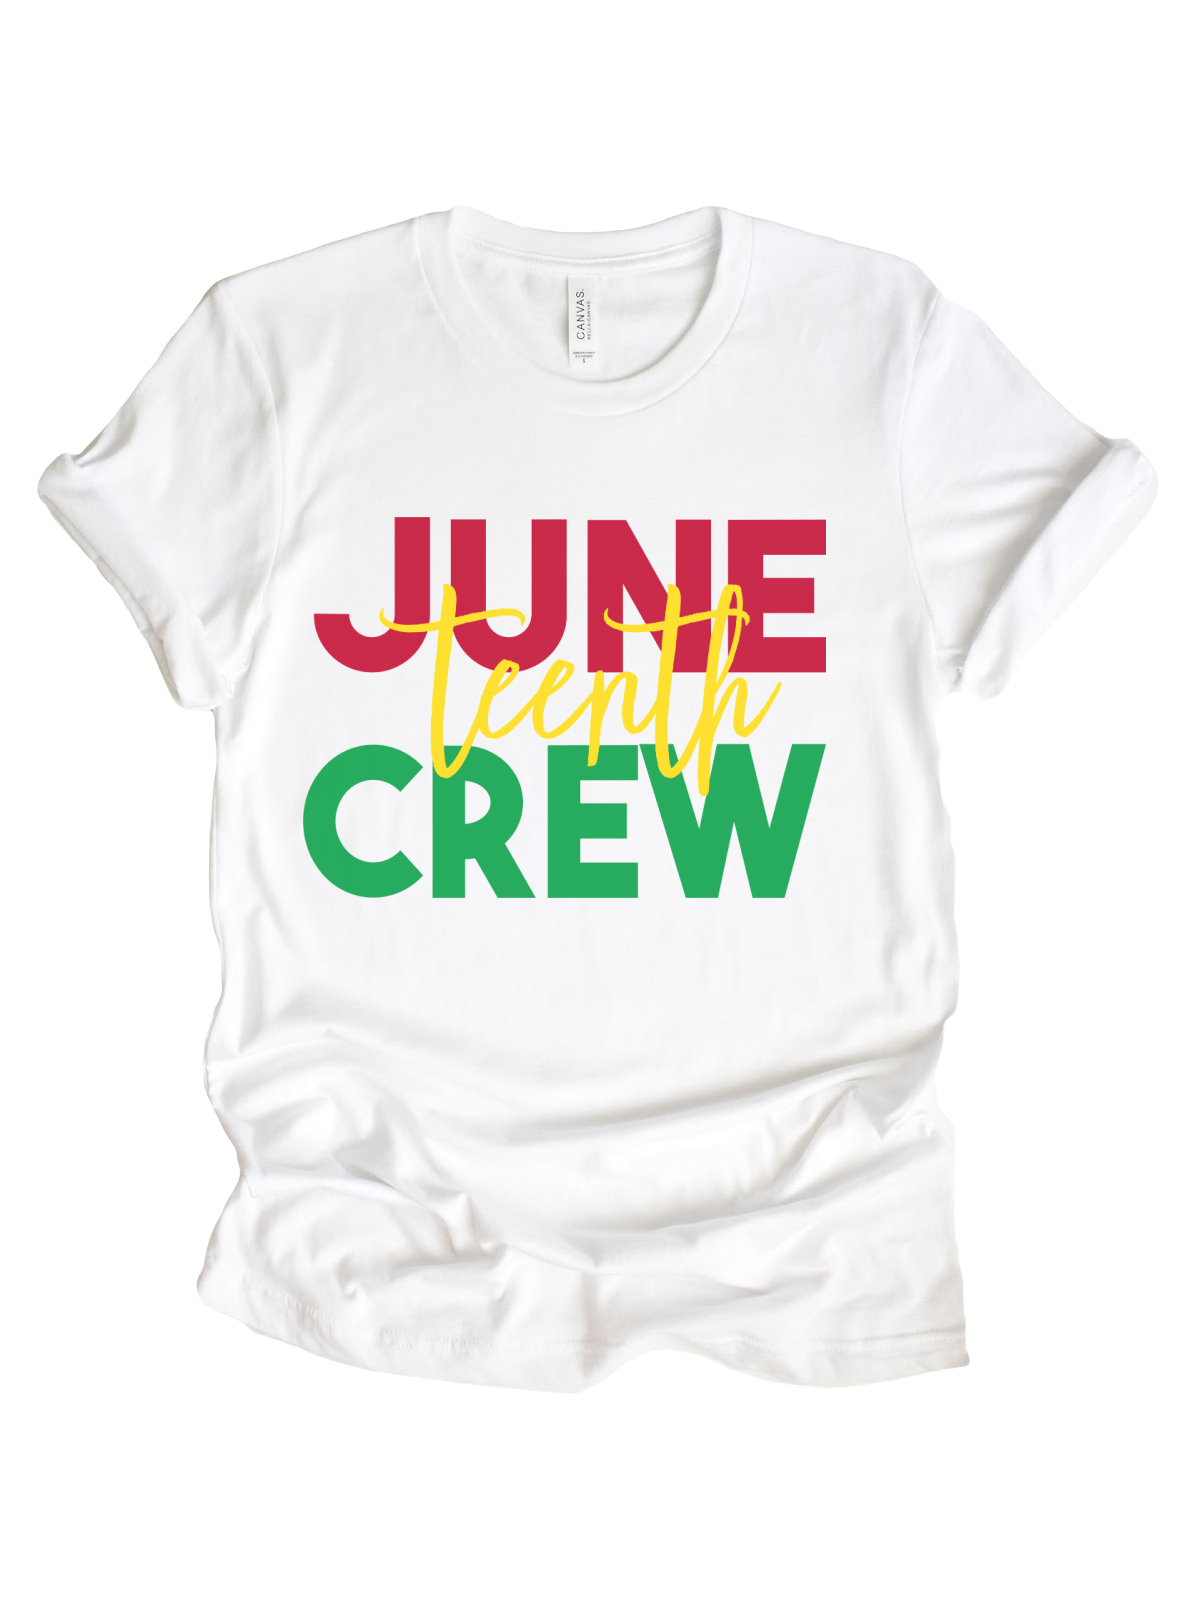 Juneteenth Crew Adult Shirt in White